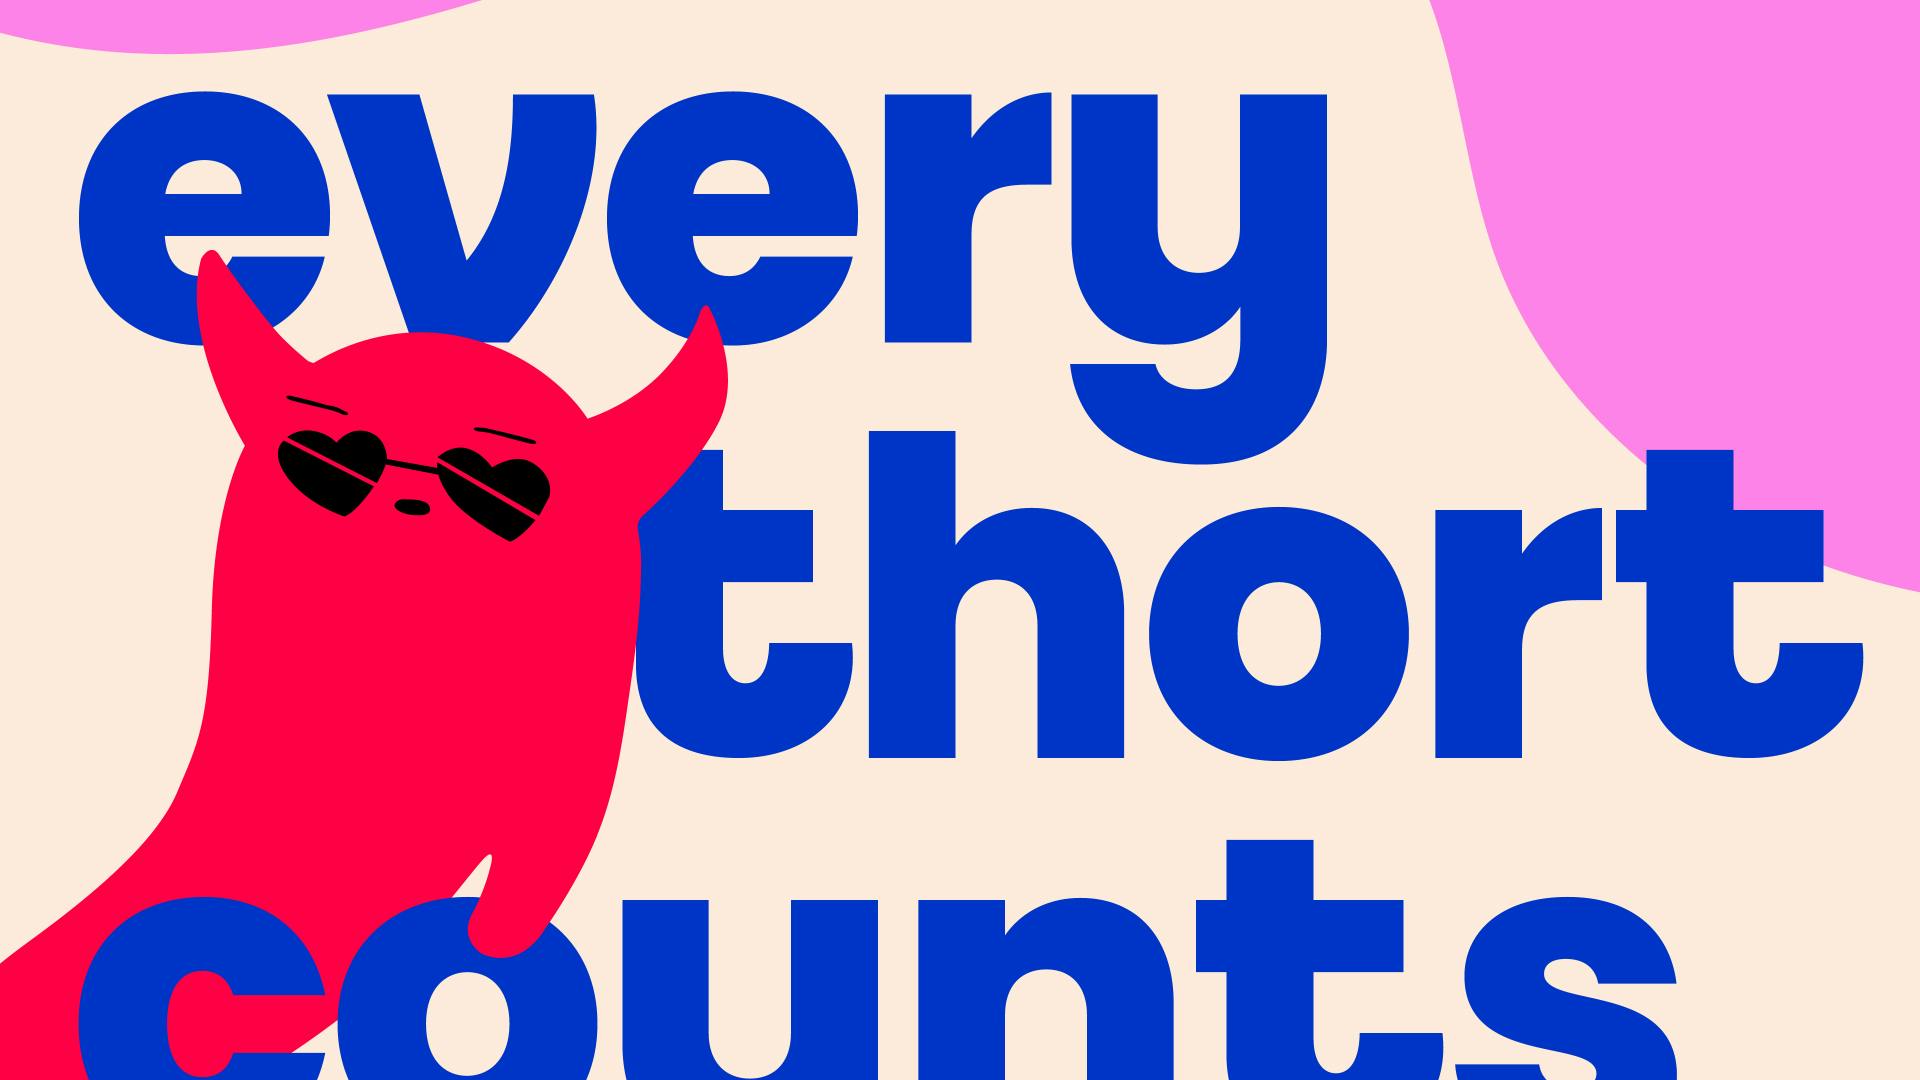 a thorful card which says: every thort counts